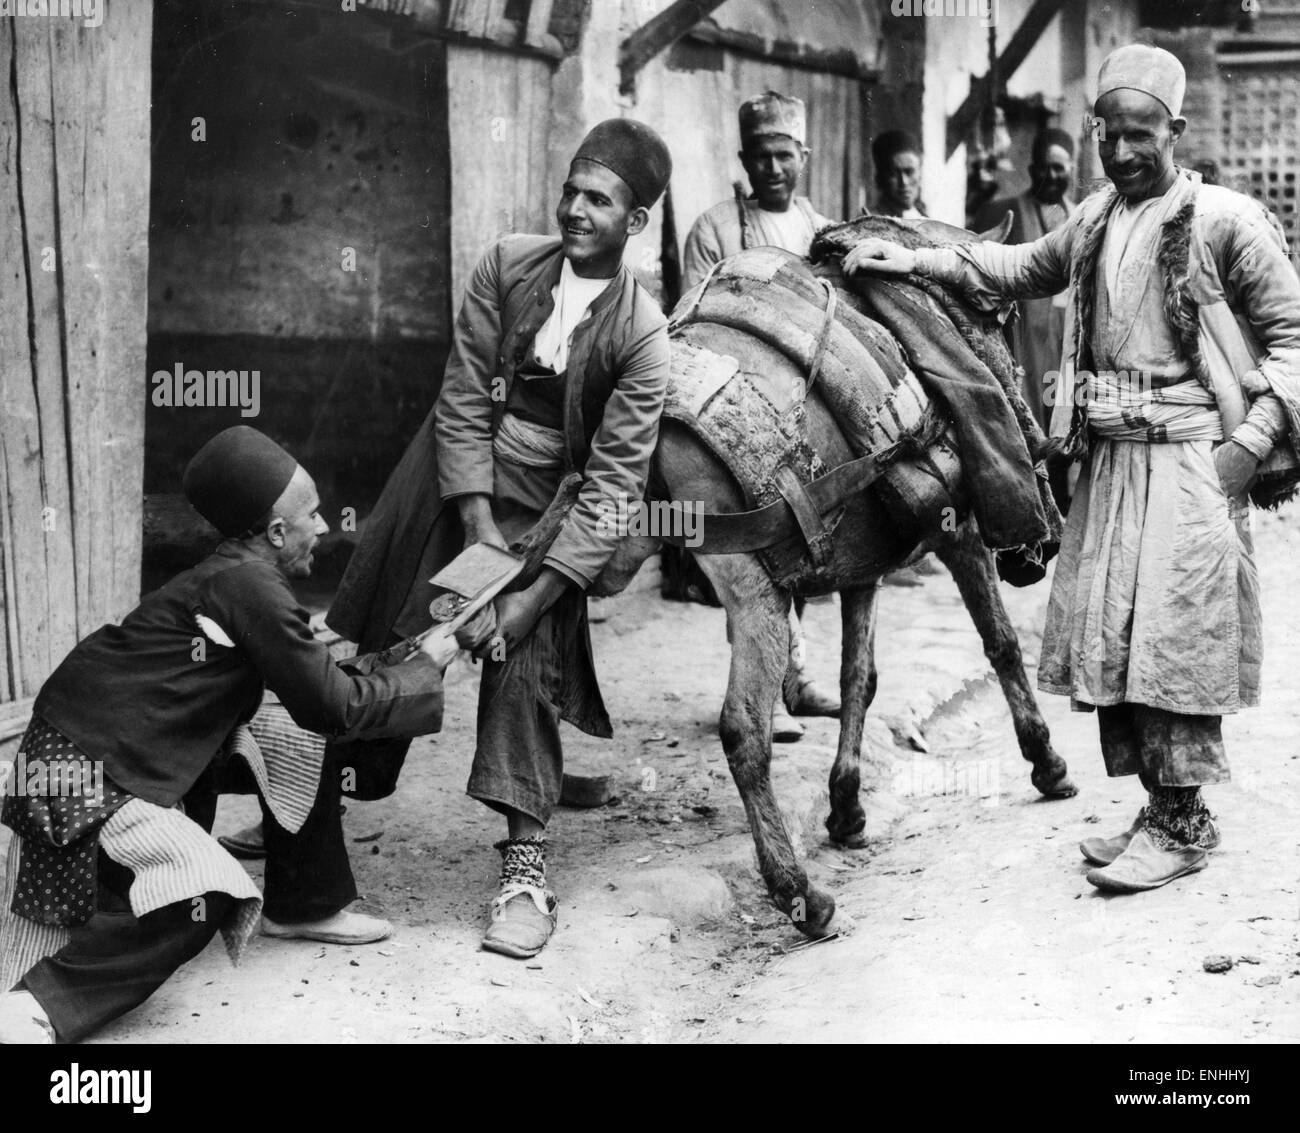 Persians shoeing a mule in Hamadan, capital city of Hamadan Province of Iran. Circa 1926. Hamadan is believed to be among the oldest Iranian cities and one of the oldest in the world. Stock Photo